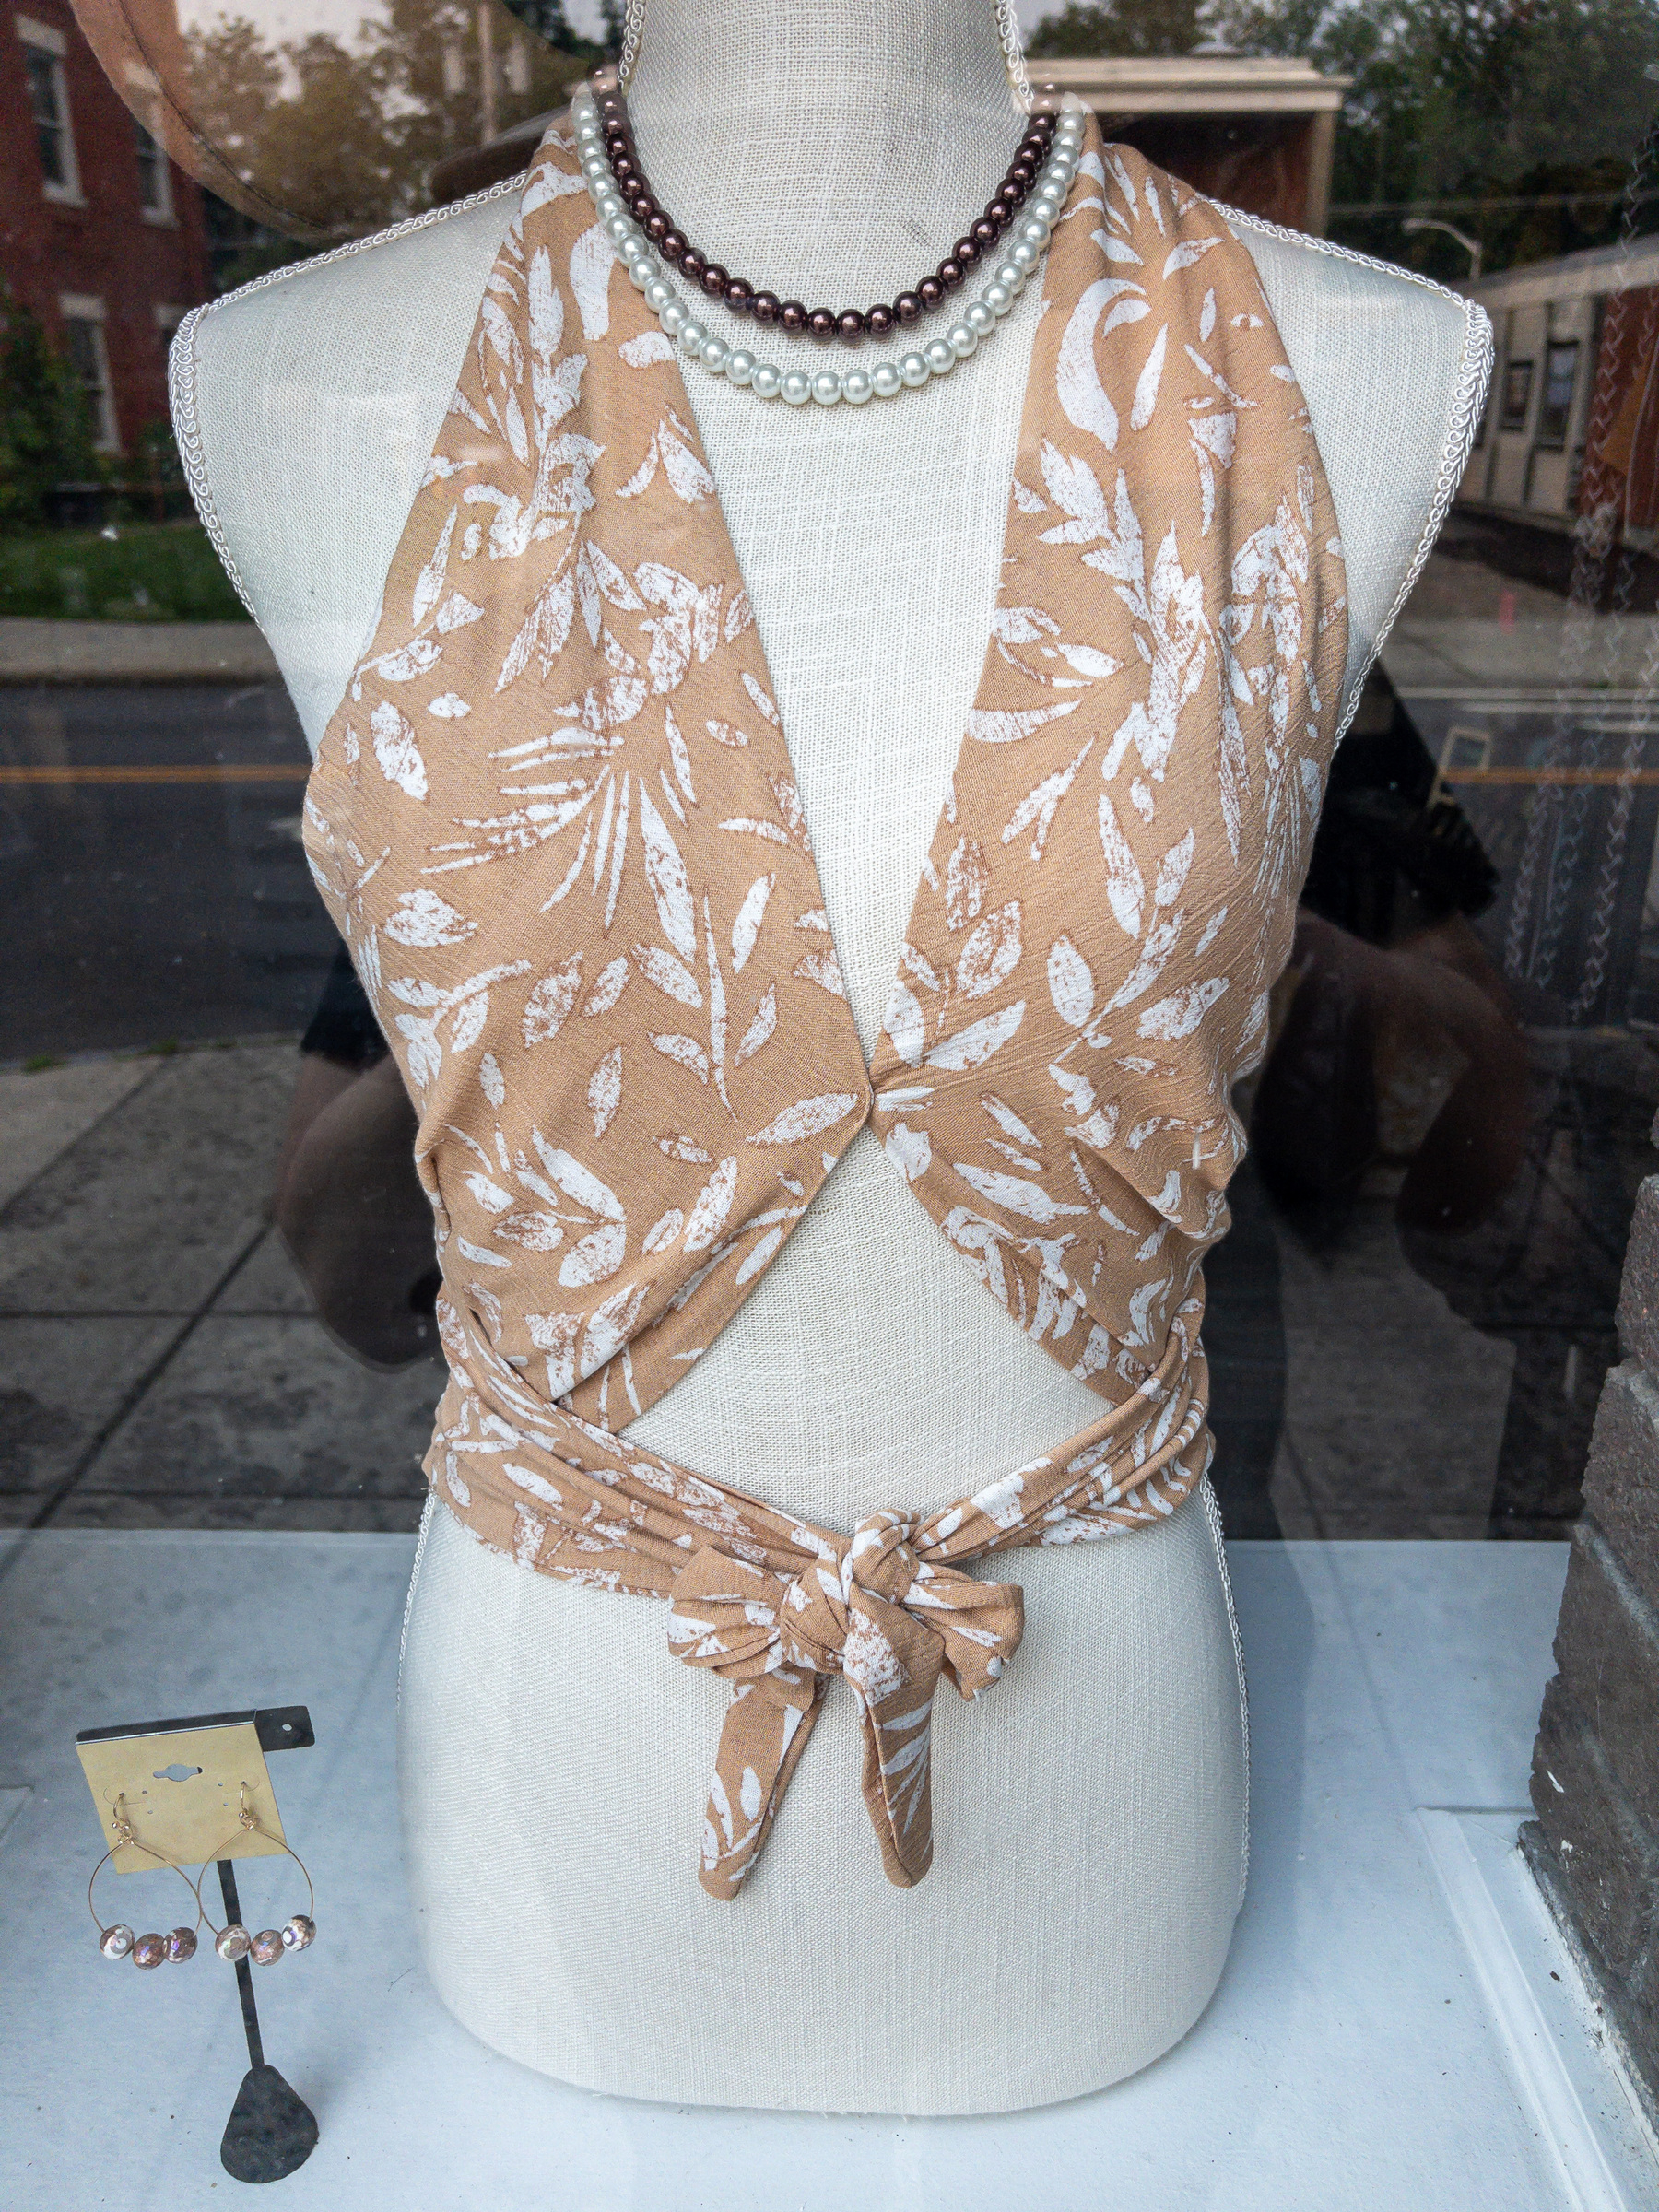 Beige floral print halter top on a female bust in a shop window.